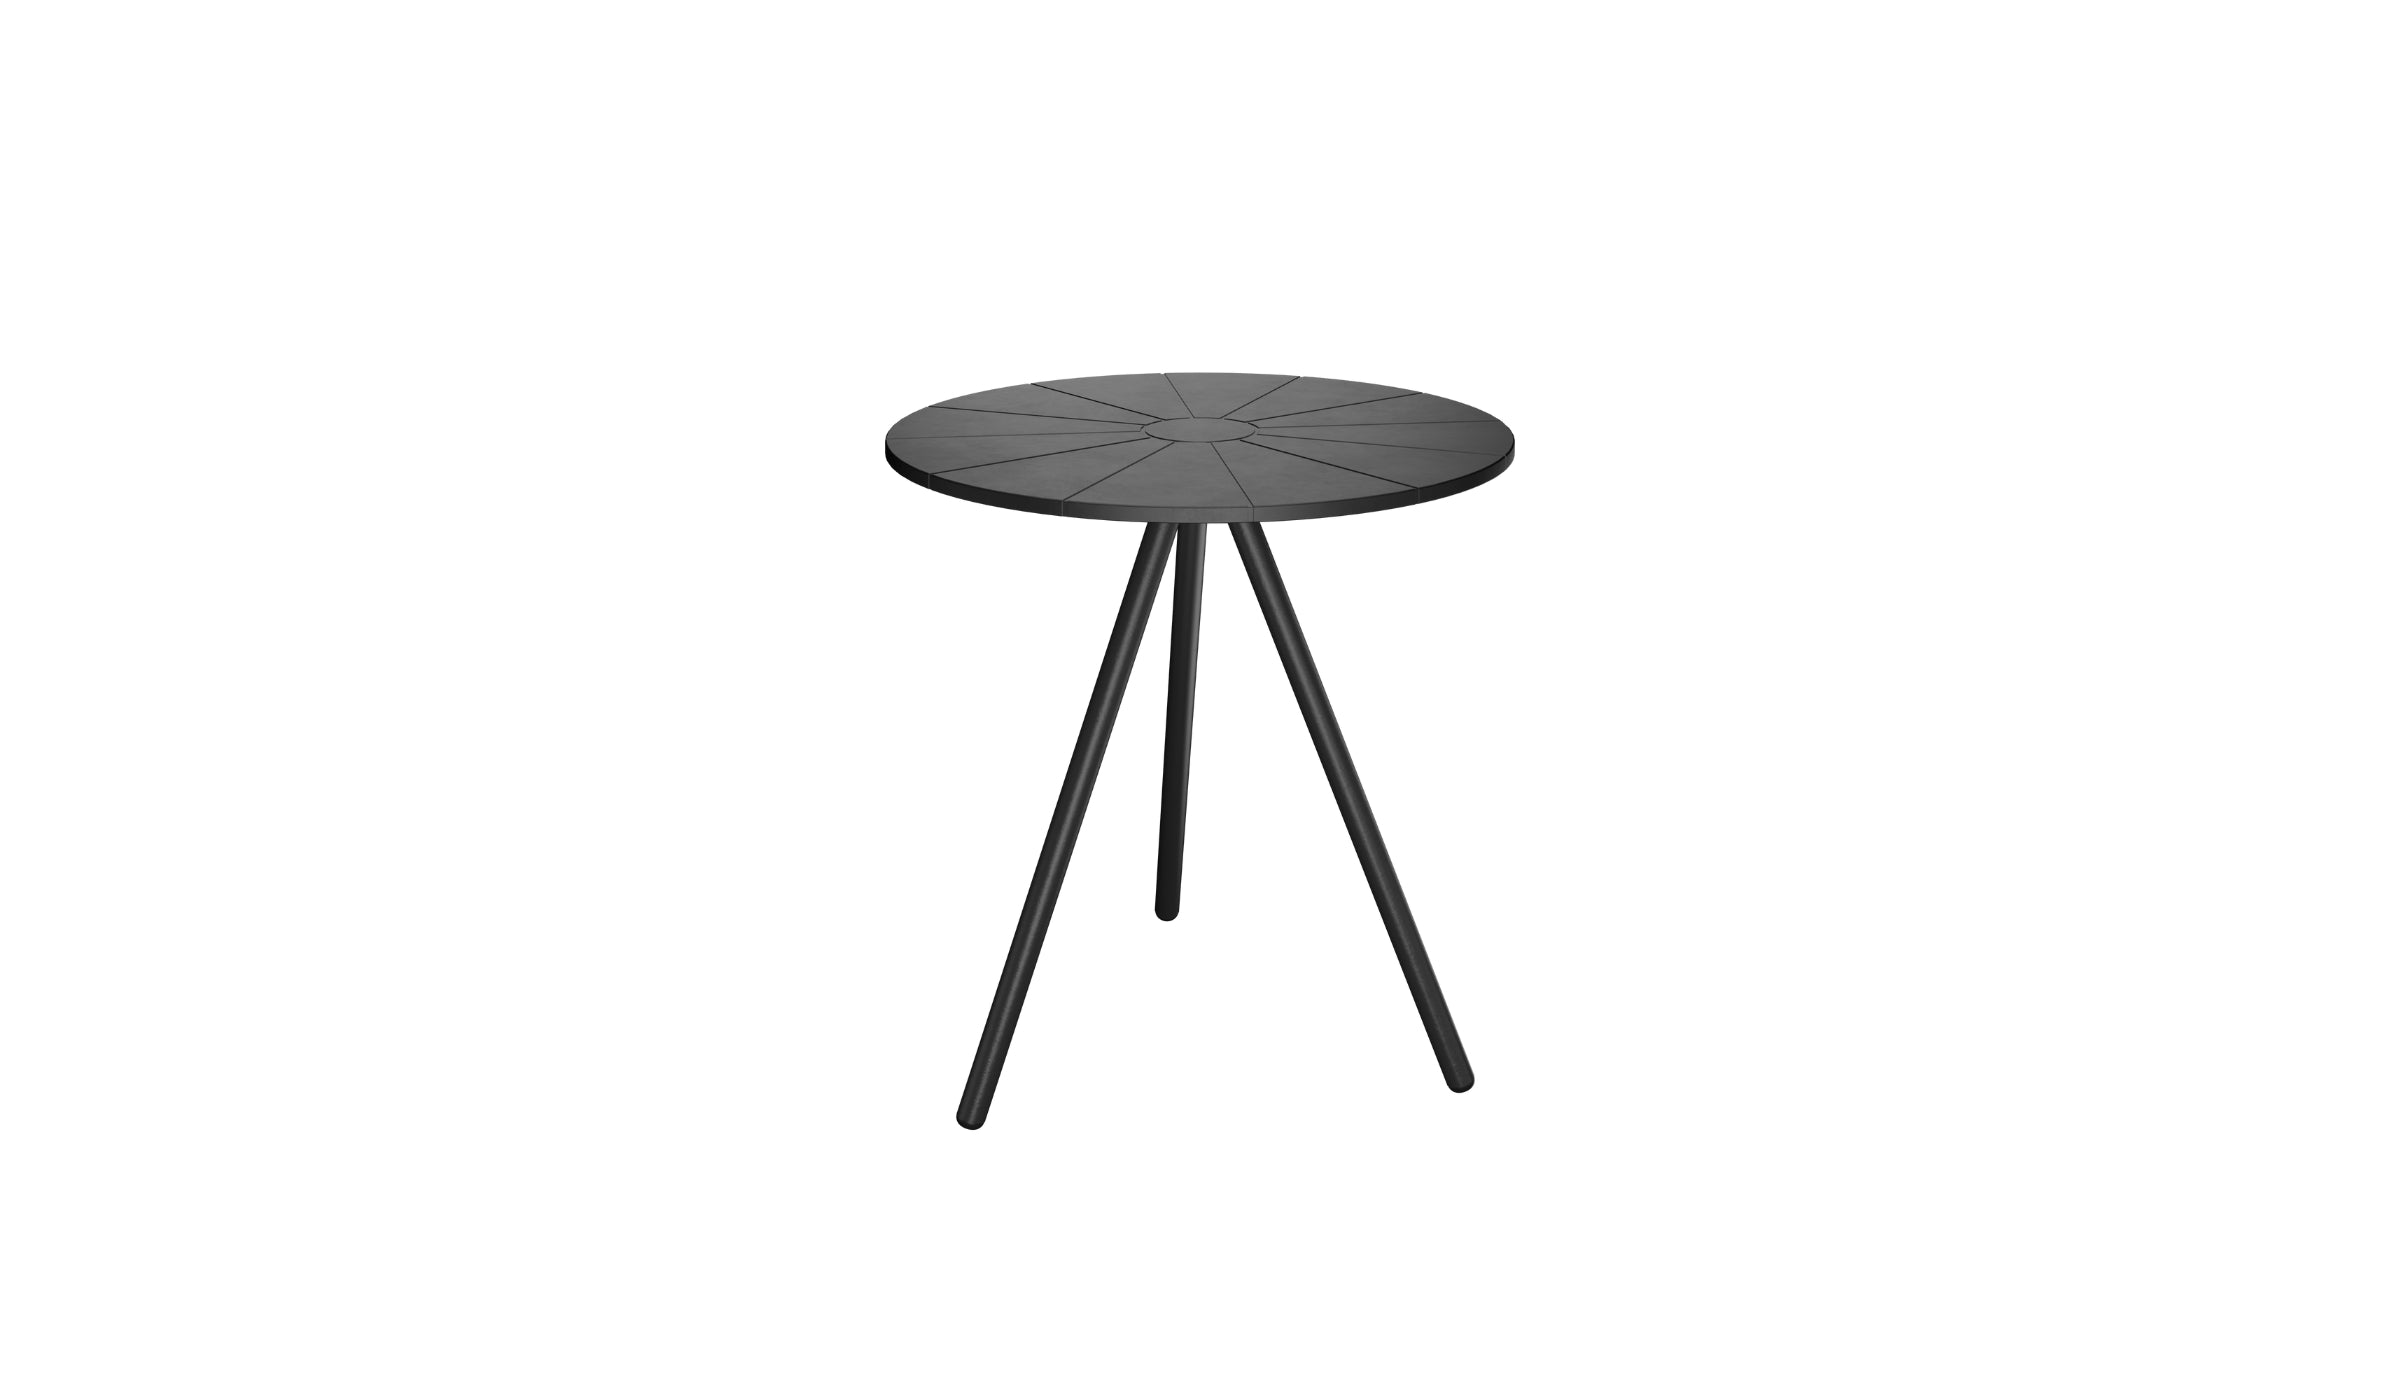 Nami - Designer outdoor dining table in recycled plastic, black